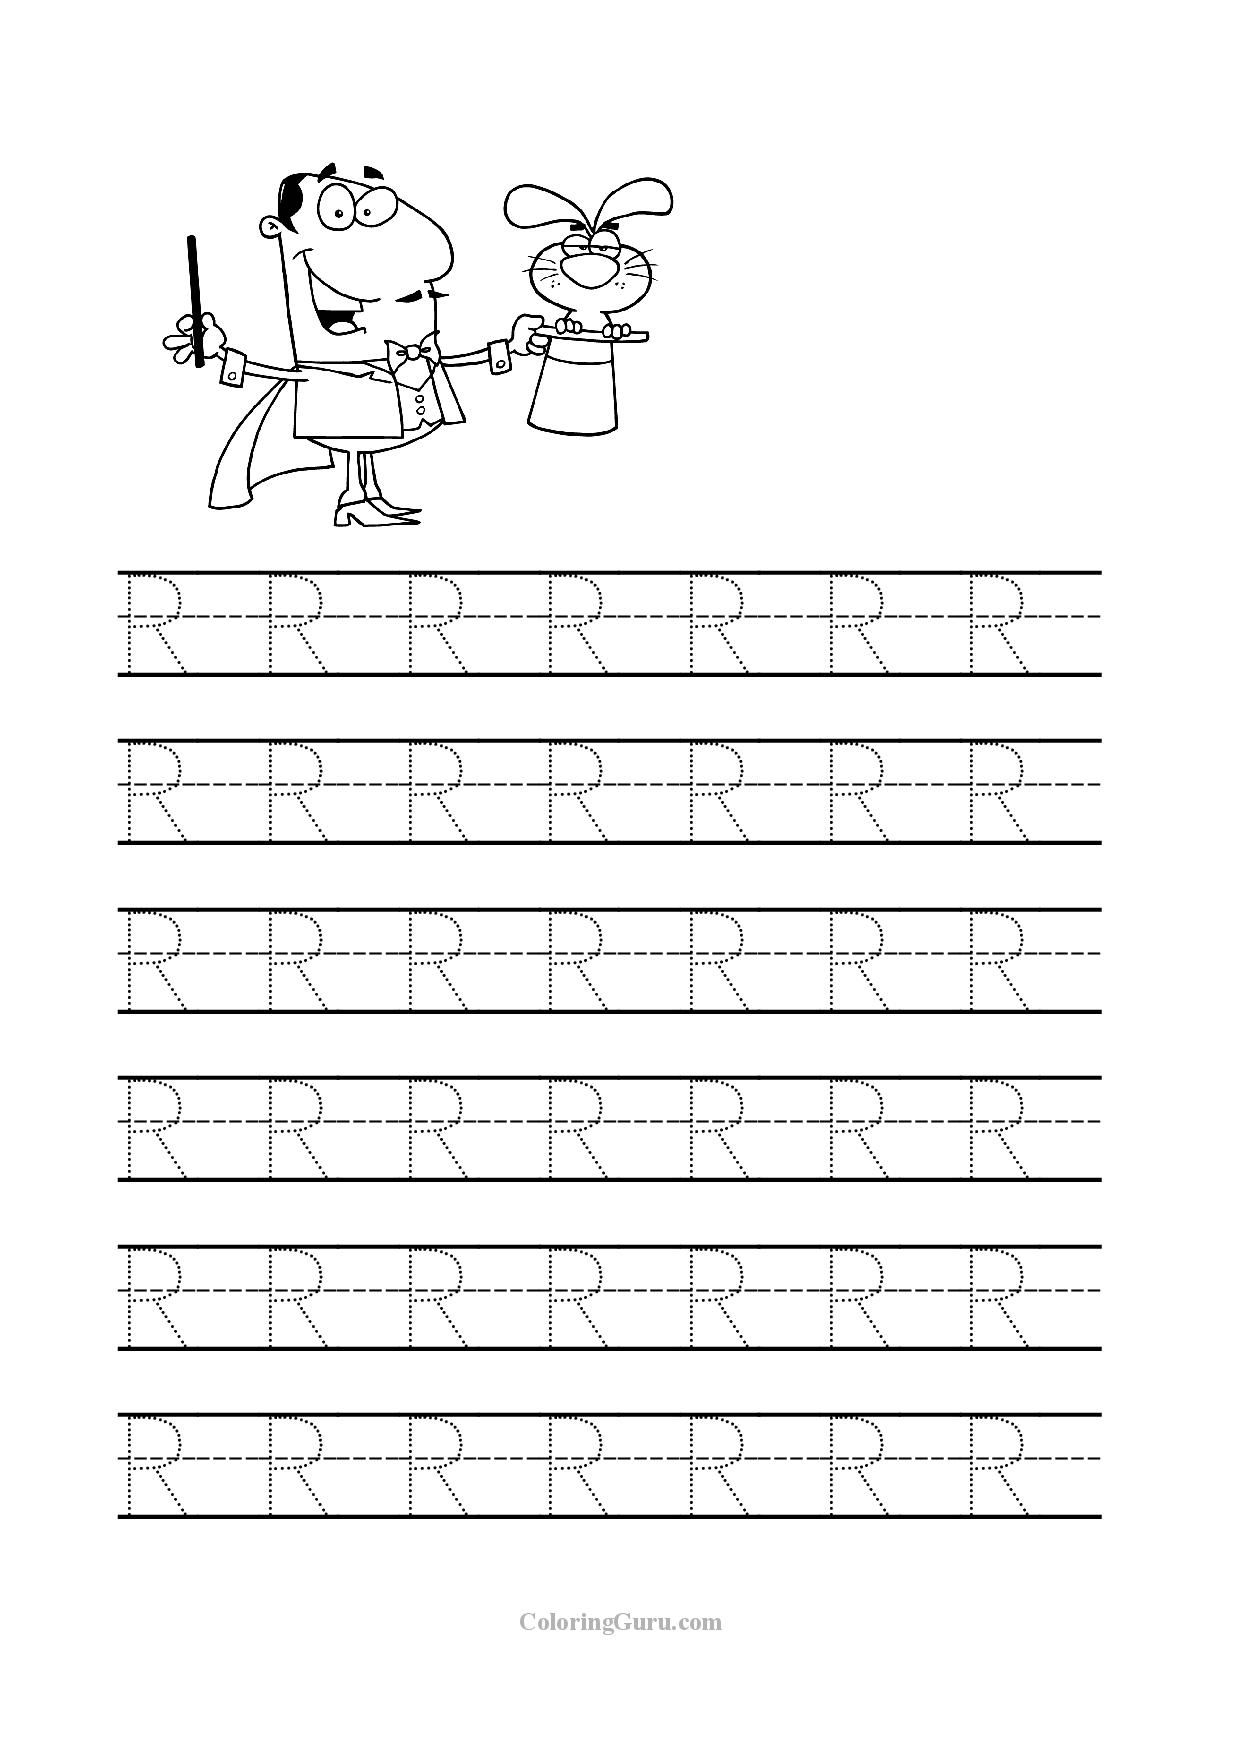 Free Printable Tracing Letter R Worksheets For Preschool within Tracing Letter R Worksheets